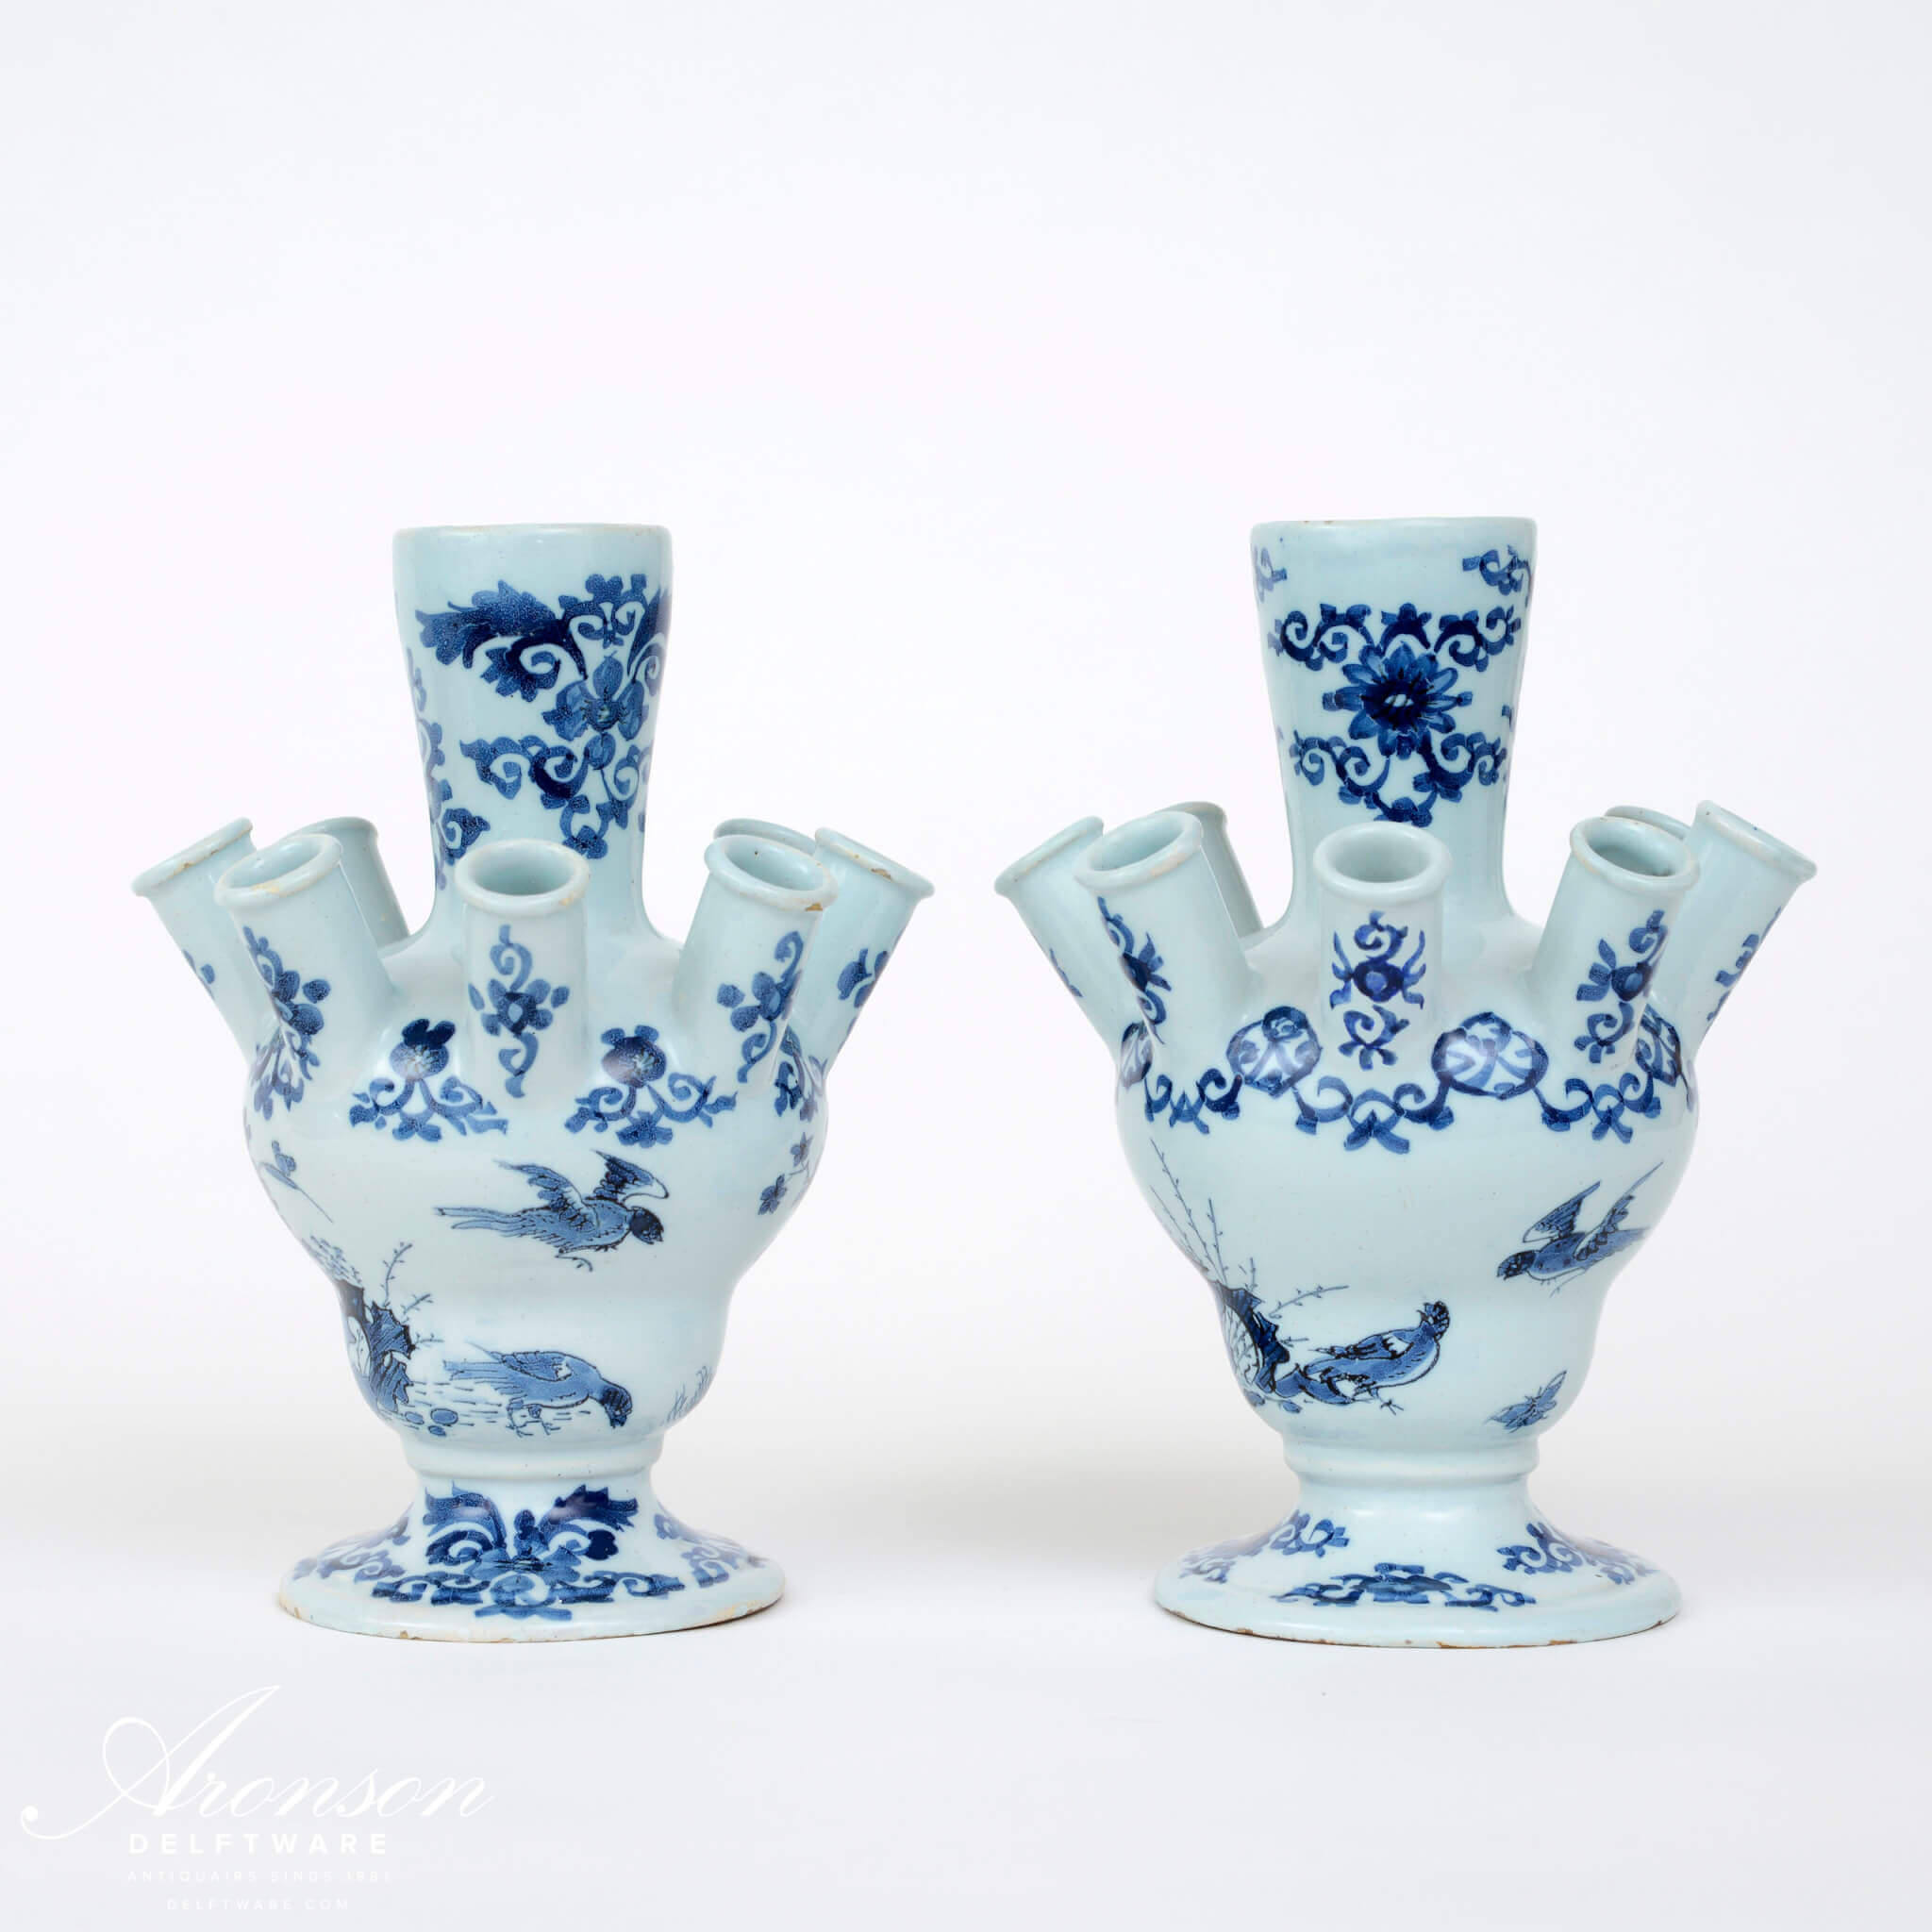 Blue and white Delftware vases